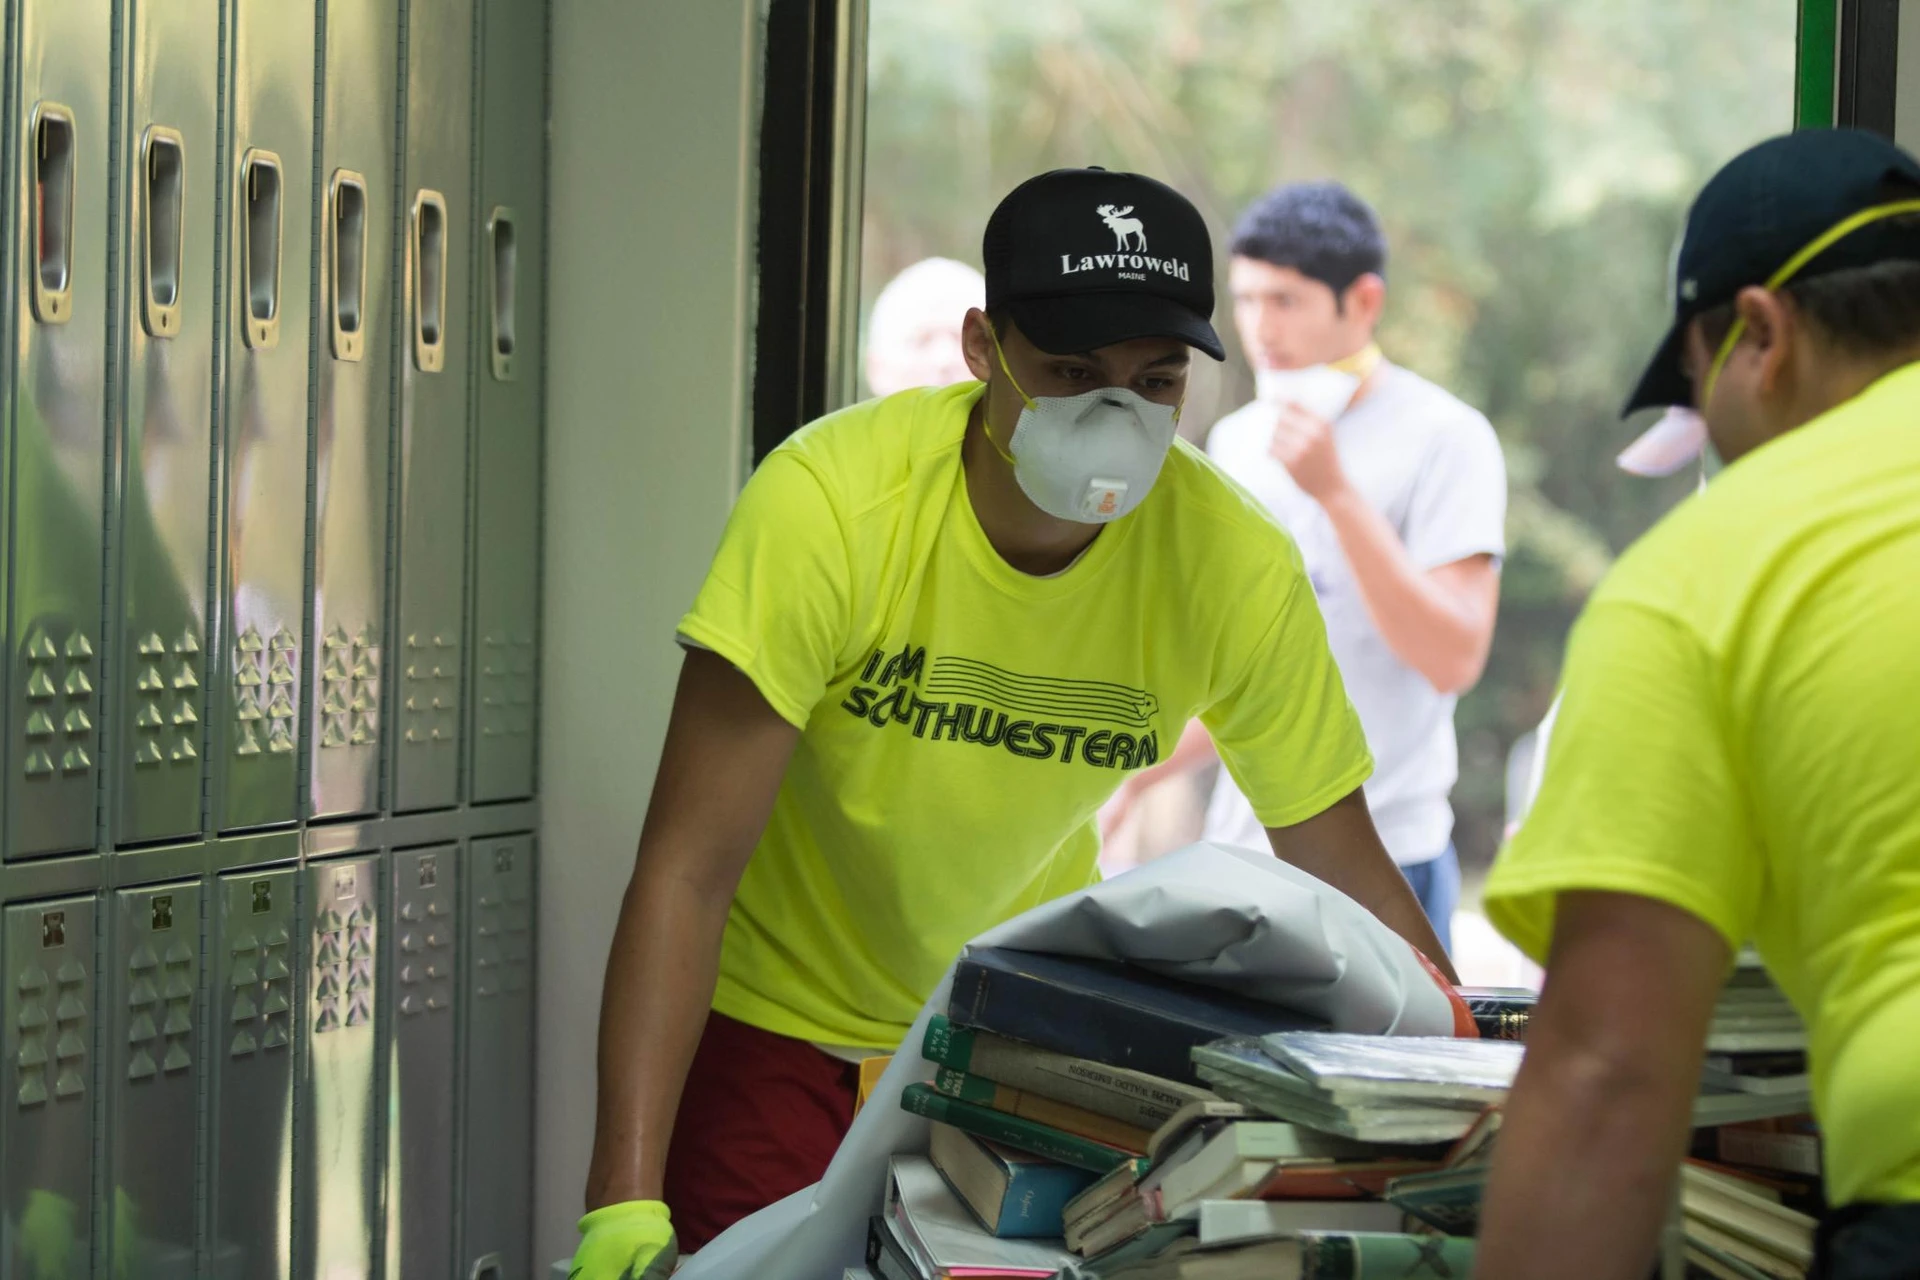 Students, dressed in matching highlight yellow t-shirts, wear white masks as they clean out some lockers